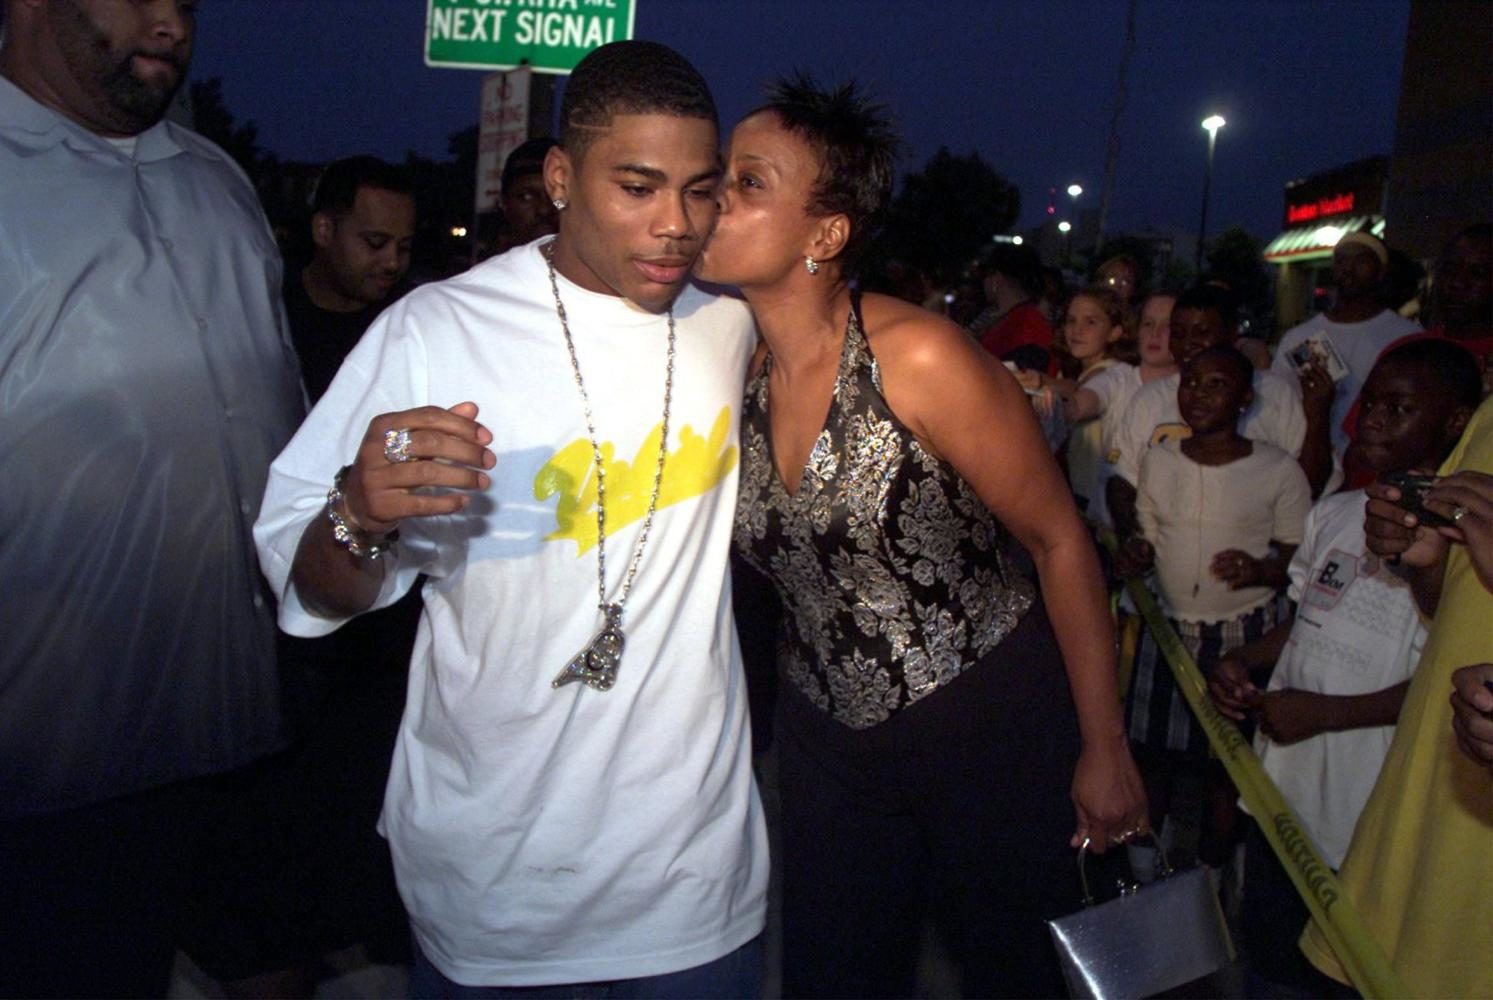 KRT ENTERTAINMENT STORY SLUGGED: NELLY KRT PHOTOGRAPH BY ANDREW CUTRARO/ST. LOUIS POST-DISPATCH (November 8) Hip-hop artist Nelly gets a kiss from his mother Rhonda Mack after they arrived at the Esquire theatre, in St. Louis, Missouri, for the premier of the movie Snipes. (SL) NC KD BL 2002 (Horiz) (Diversity) (smd)